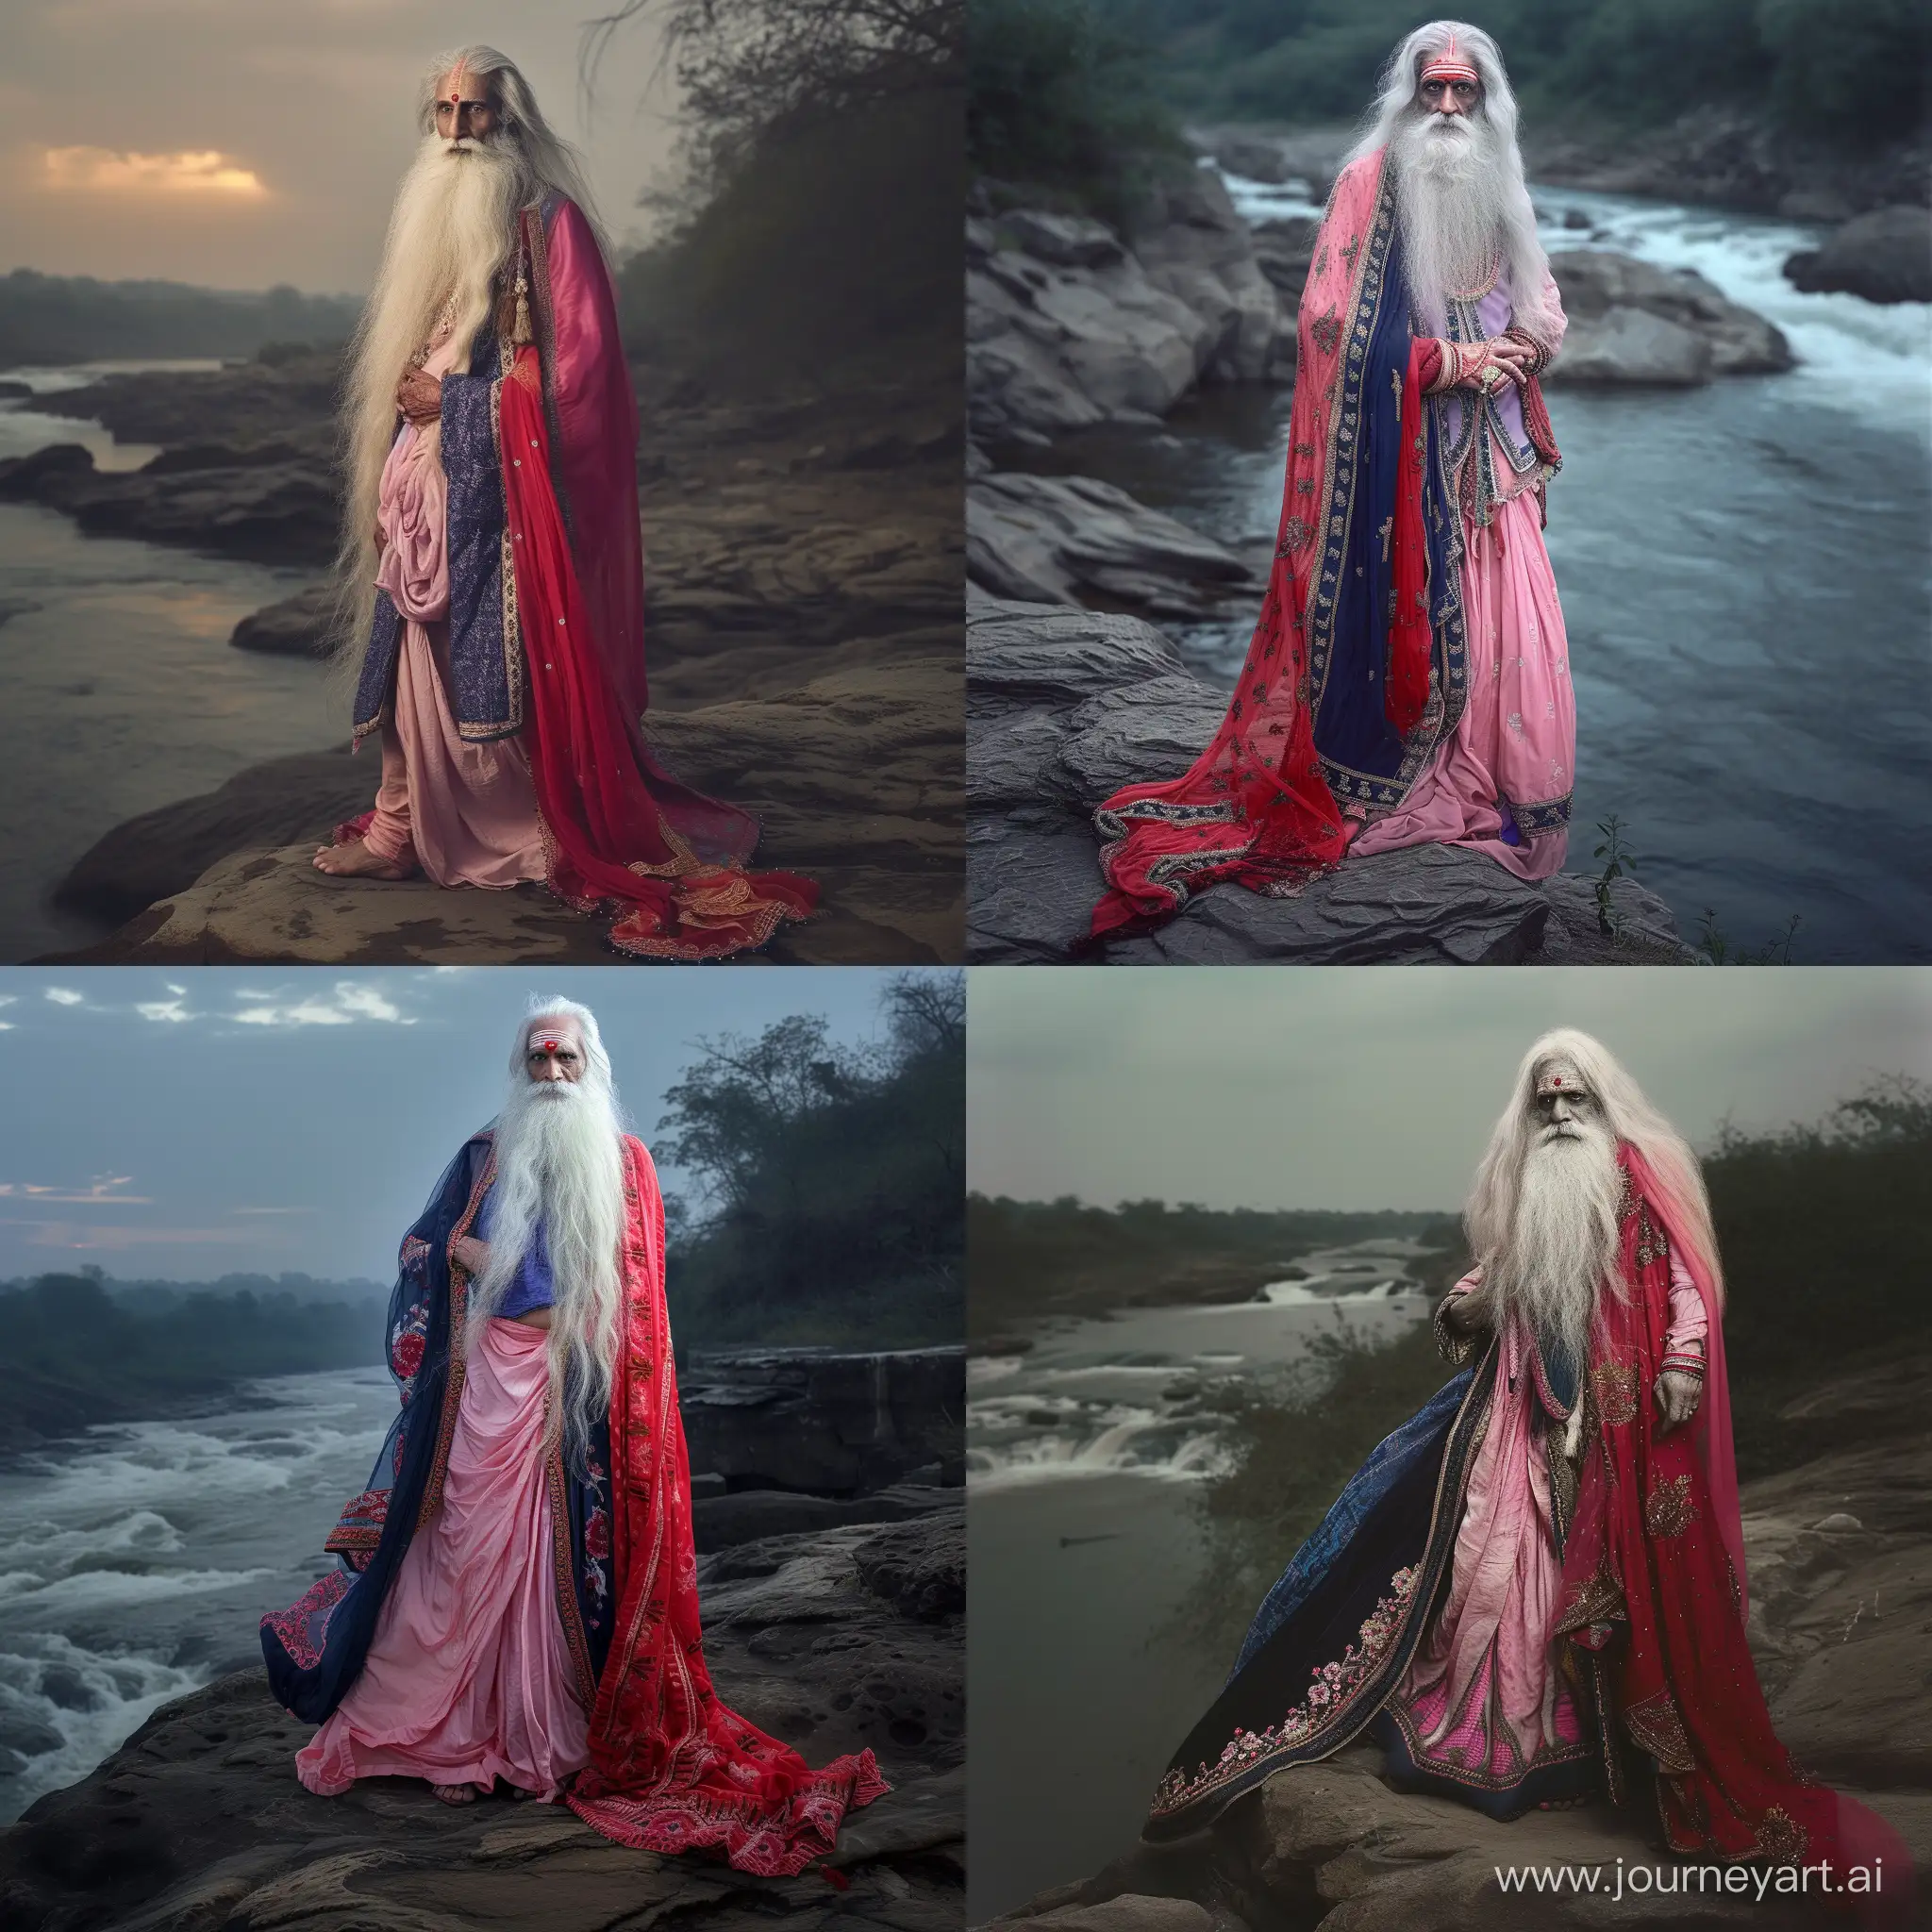 dark 90 years old india men white longhair  in  a tale and long beard wearing a pink with bleu dress  and red shawl  standing on a rock whit  a river in the background soft light and contrast  low angle 50mm fujixt4   fotorealistisch